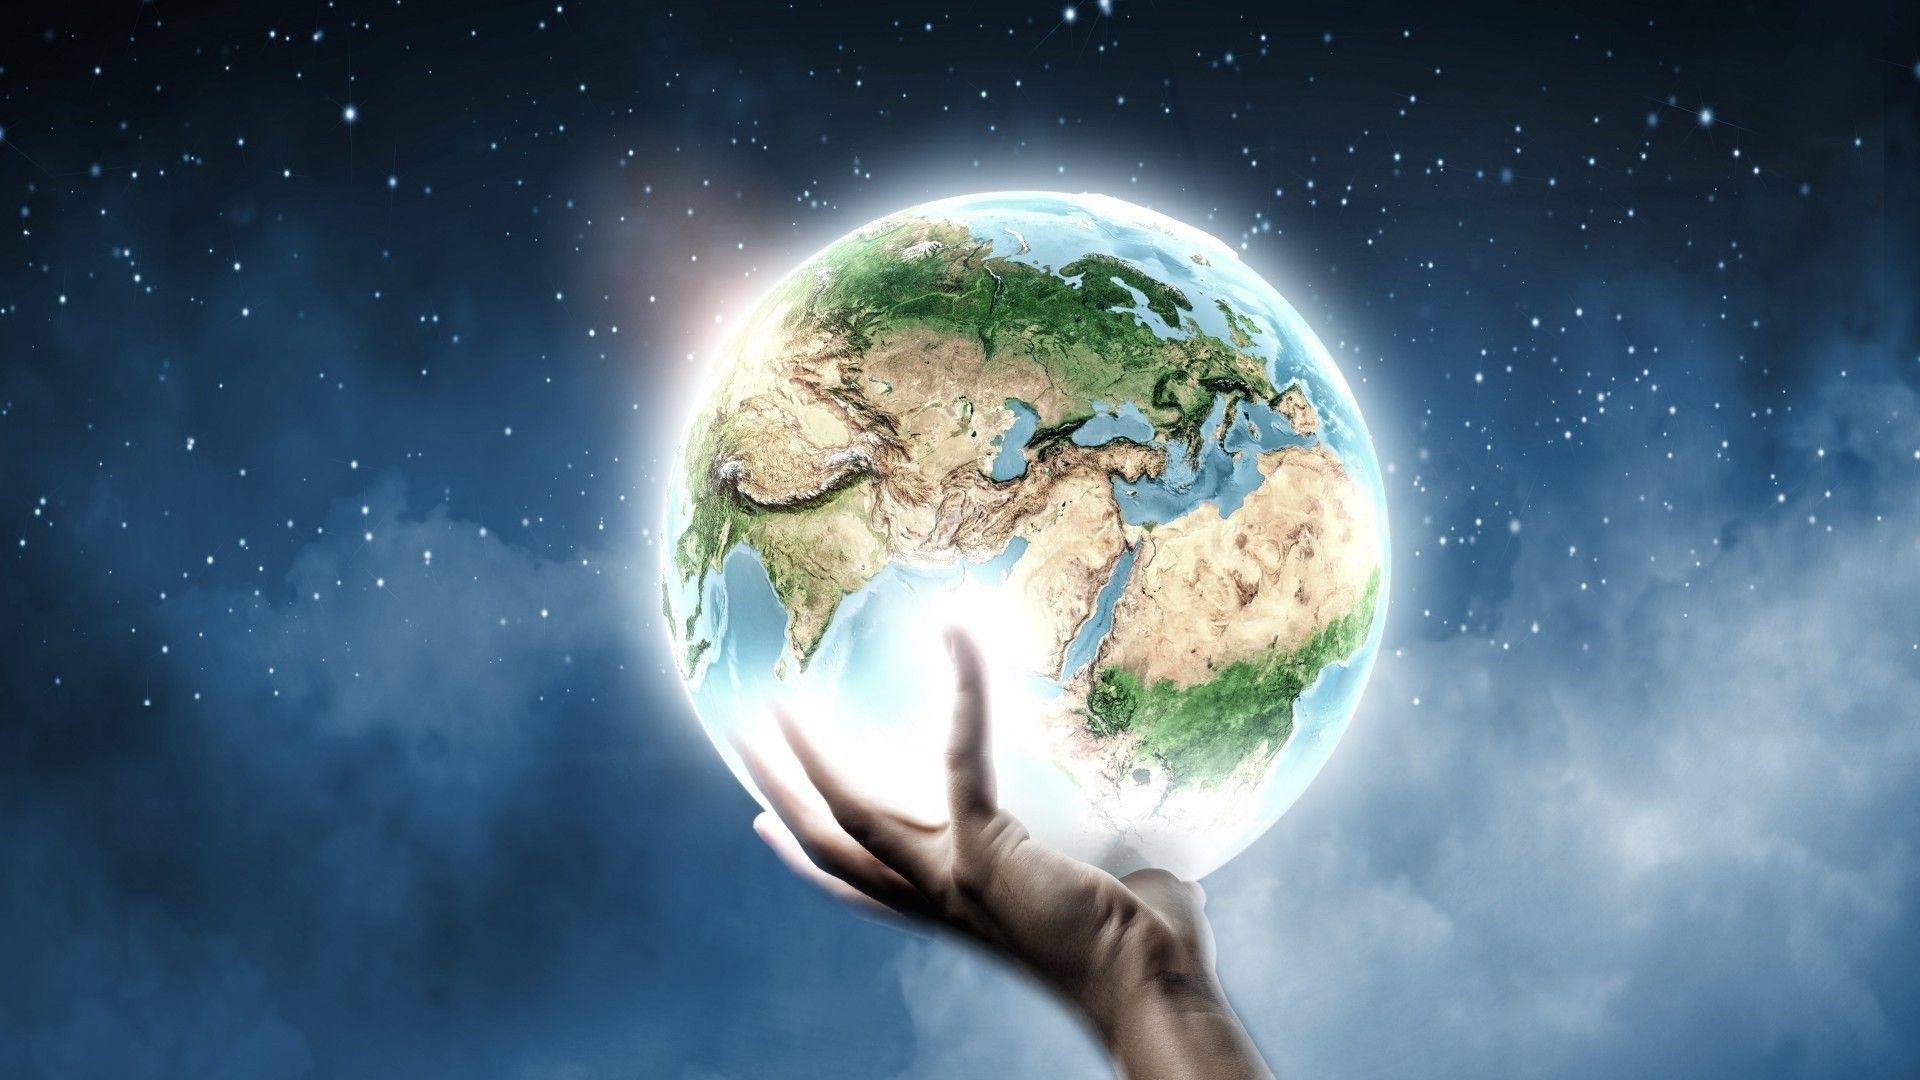 Save Earth Images Wallpapers